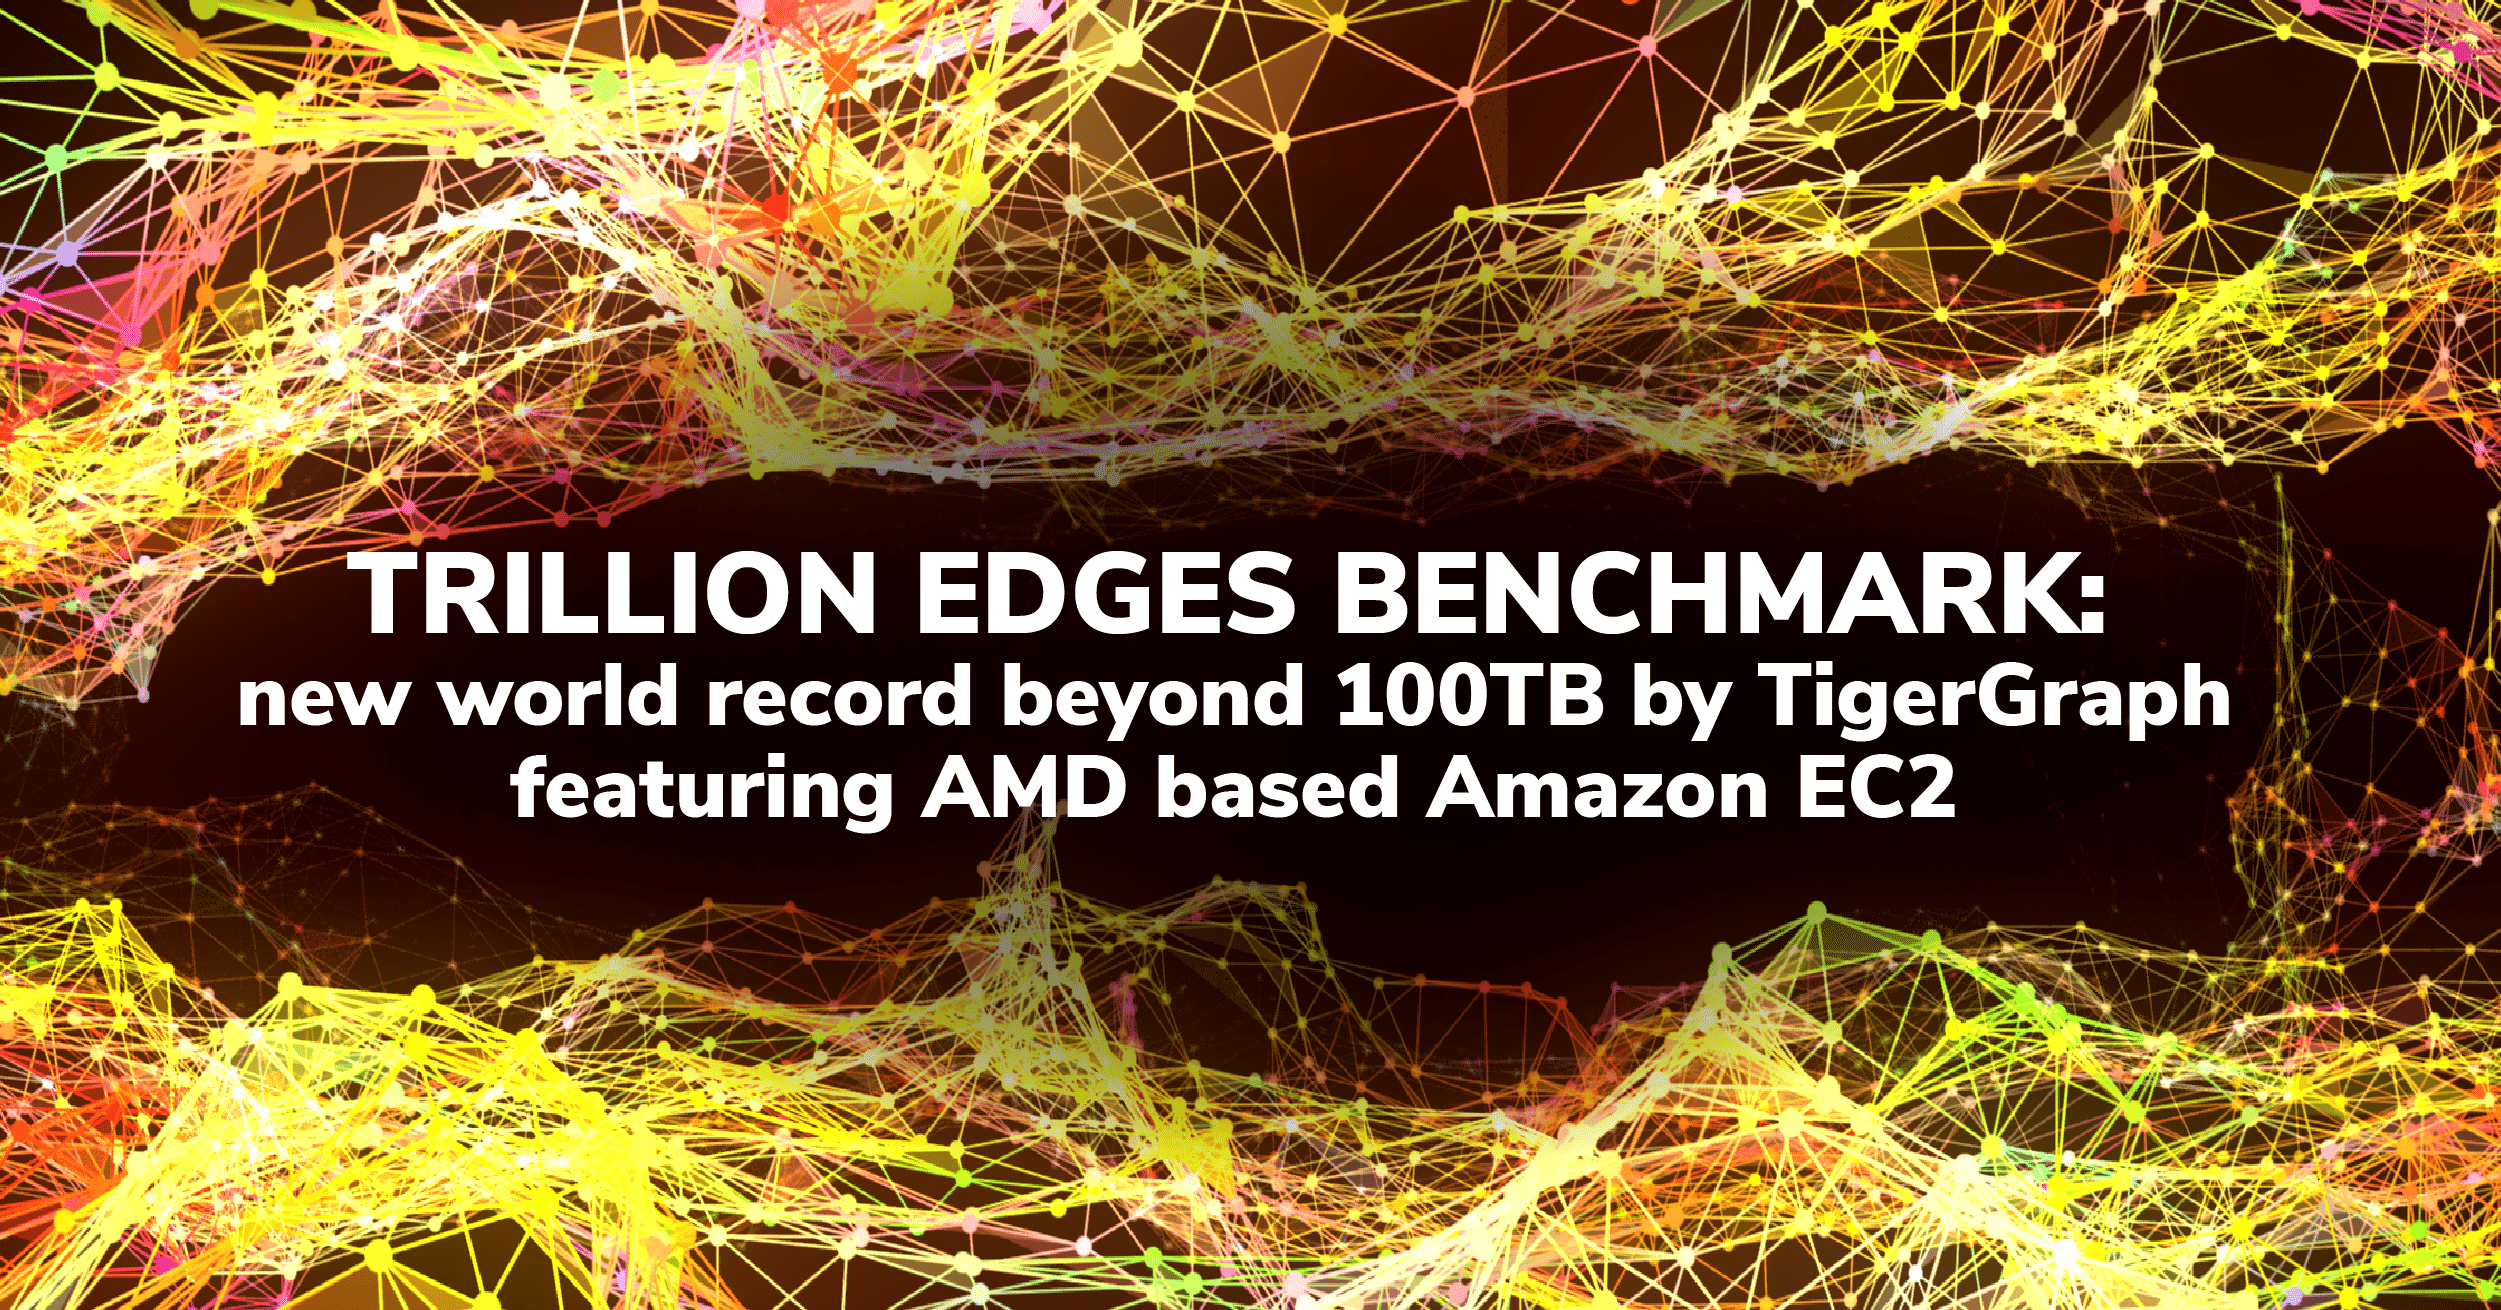 Trillion edges benchmark: new world record beyond 100TB by TigerGraph featuring AMD based Amazon EC2 instances